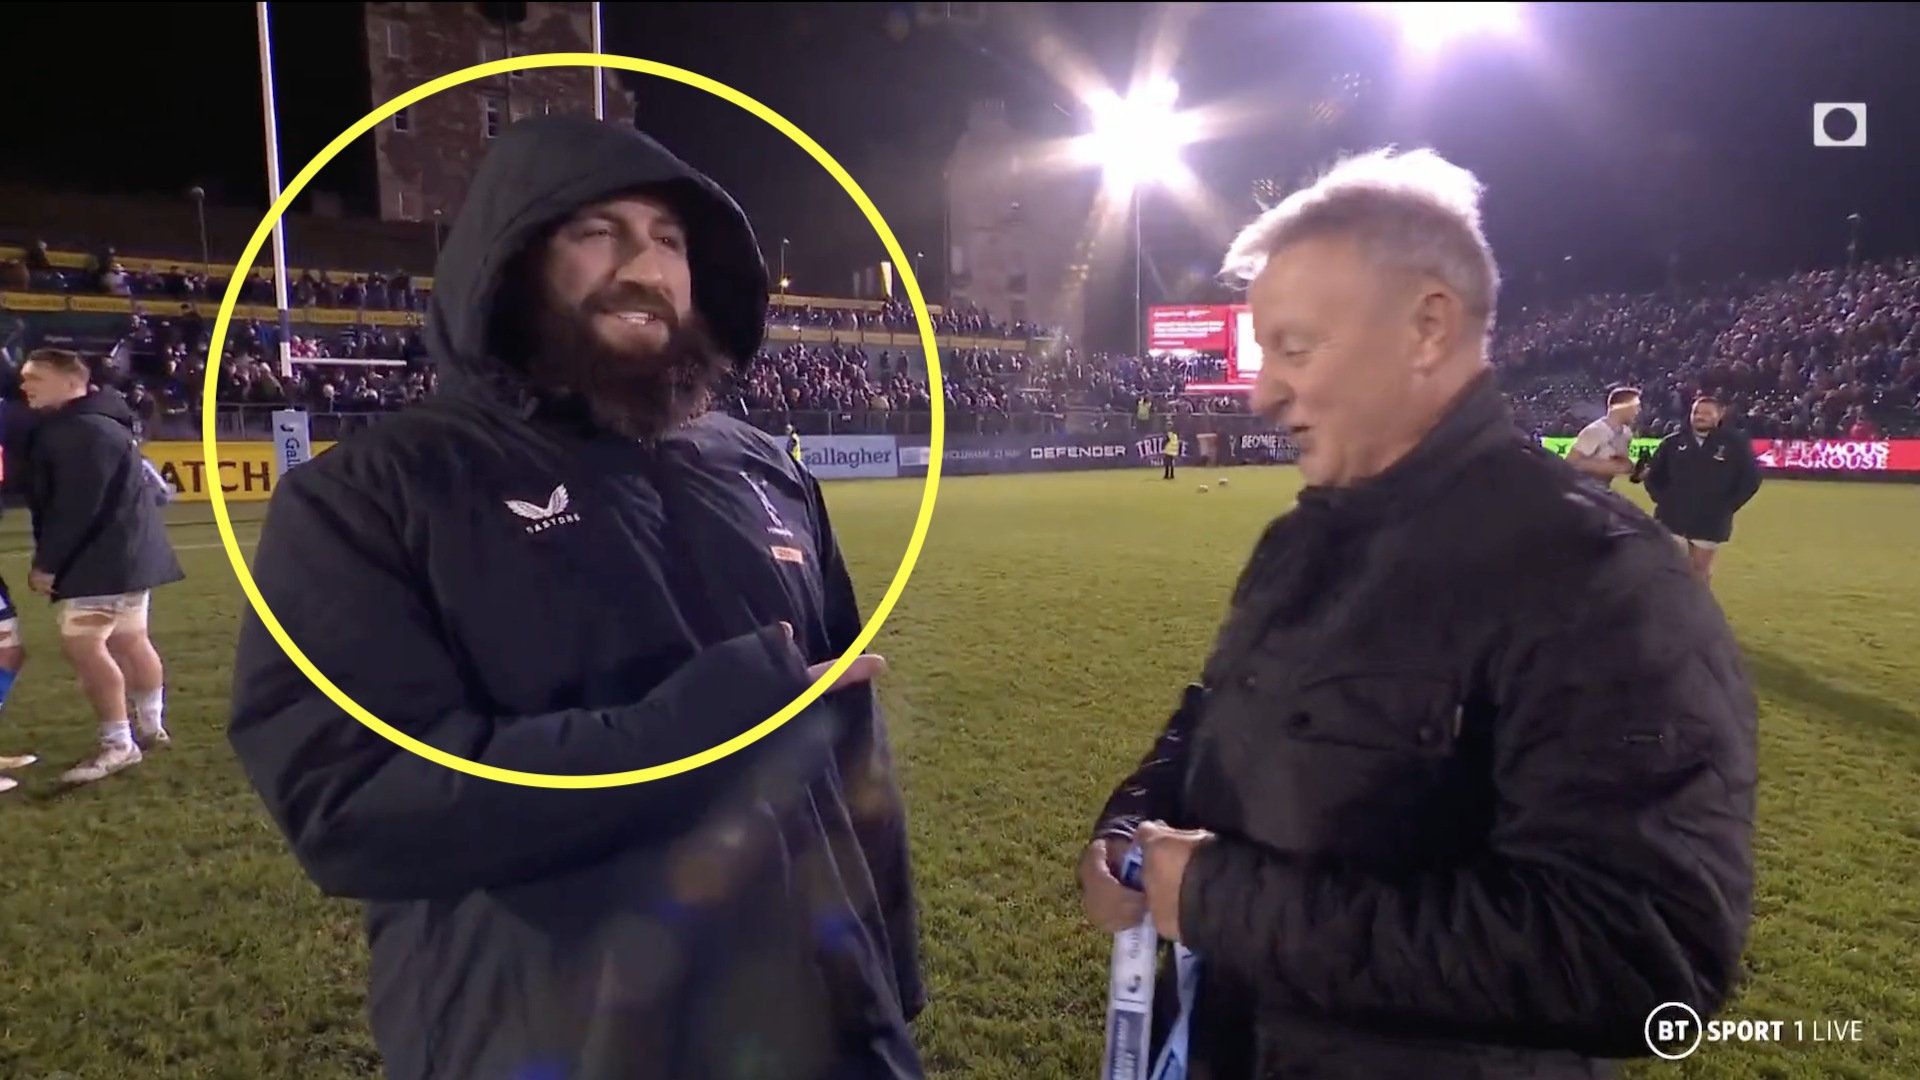 Joe Marler is in top form in hilariously awkward interview